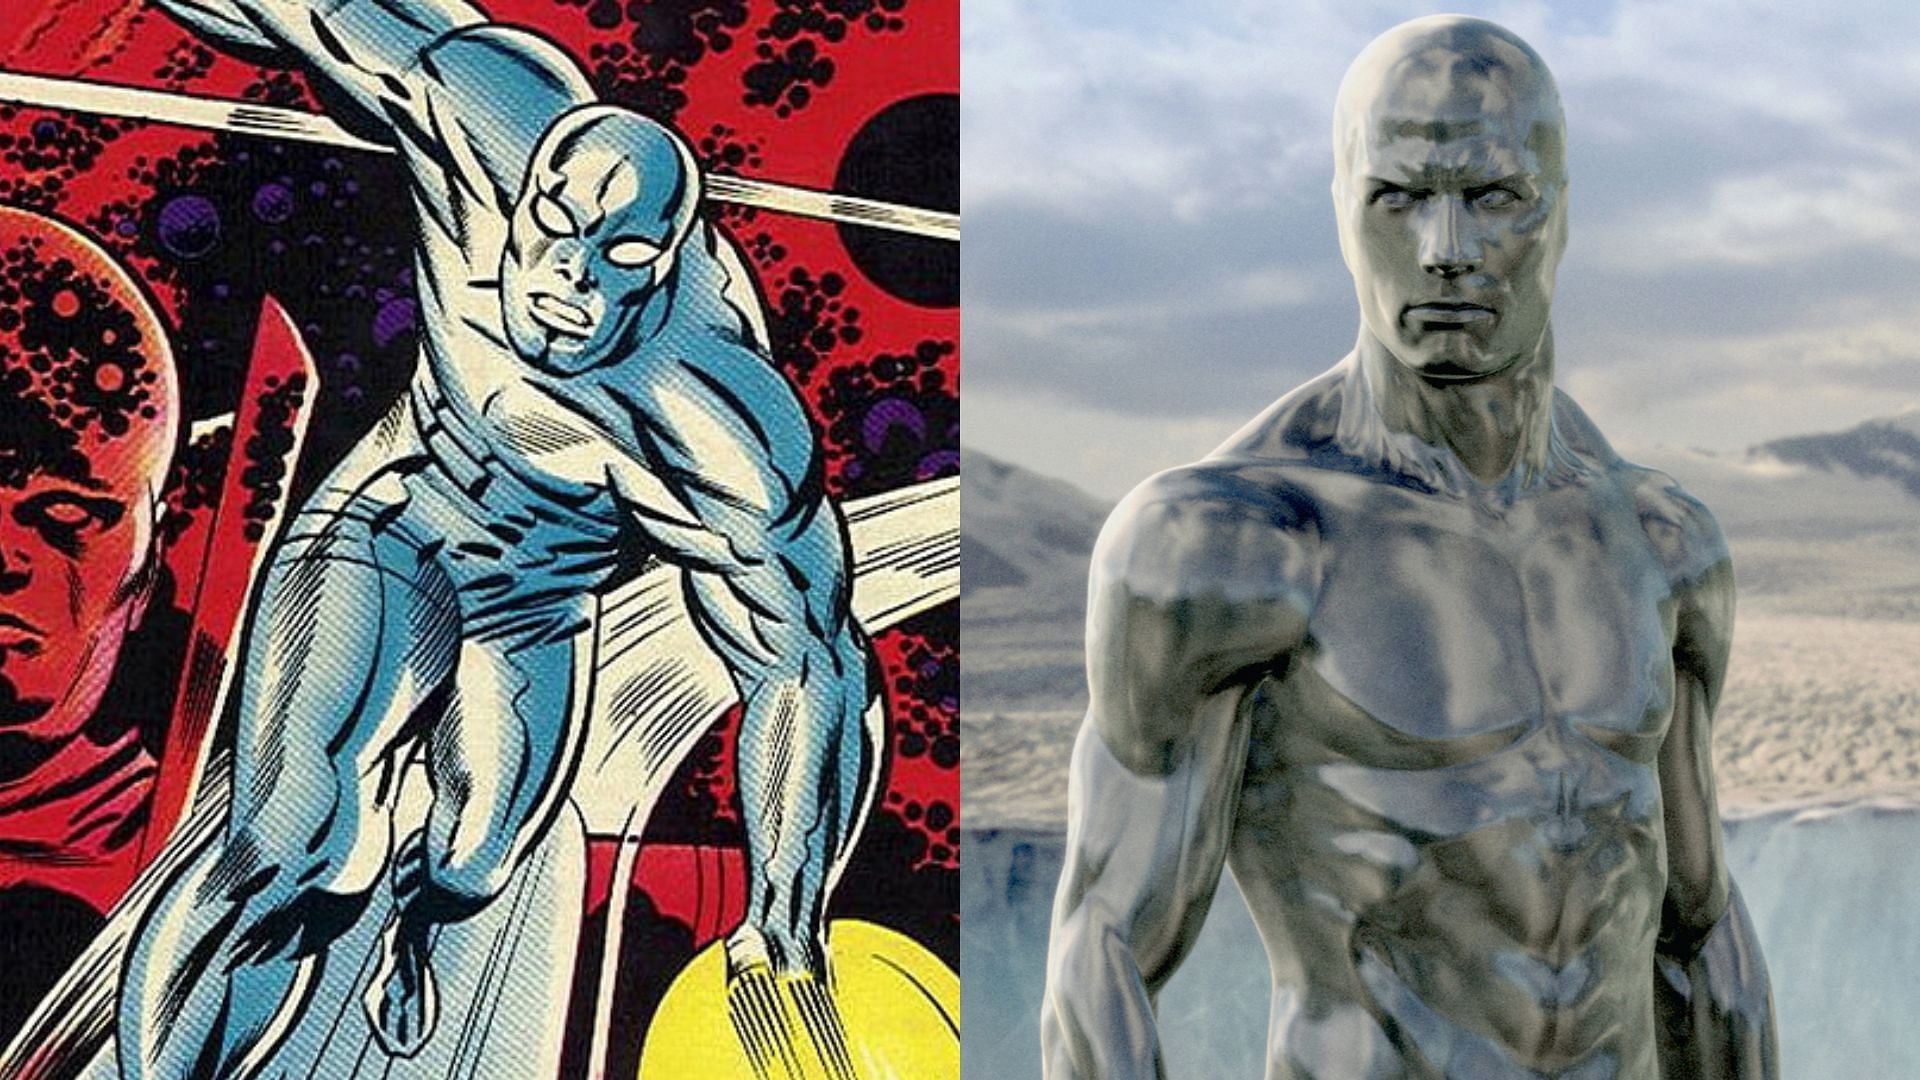 Left: Silver Surfer in comics, Right: Silver Surfer played by Doug Jones and Laurence Fishburne in Fantastic Four: Rise of the Silver Surfer (Images via Marvel/20th Century Fox)